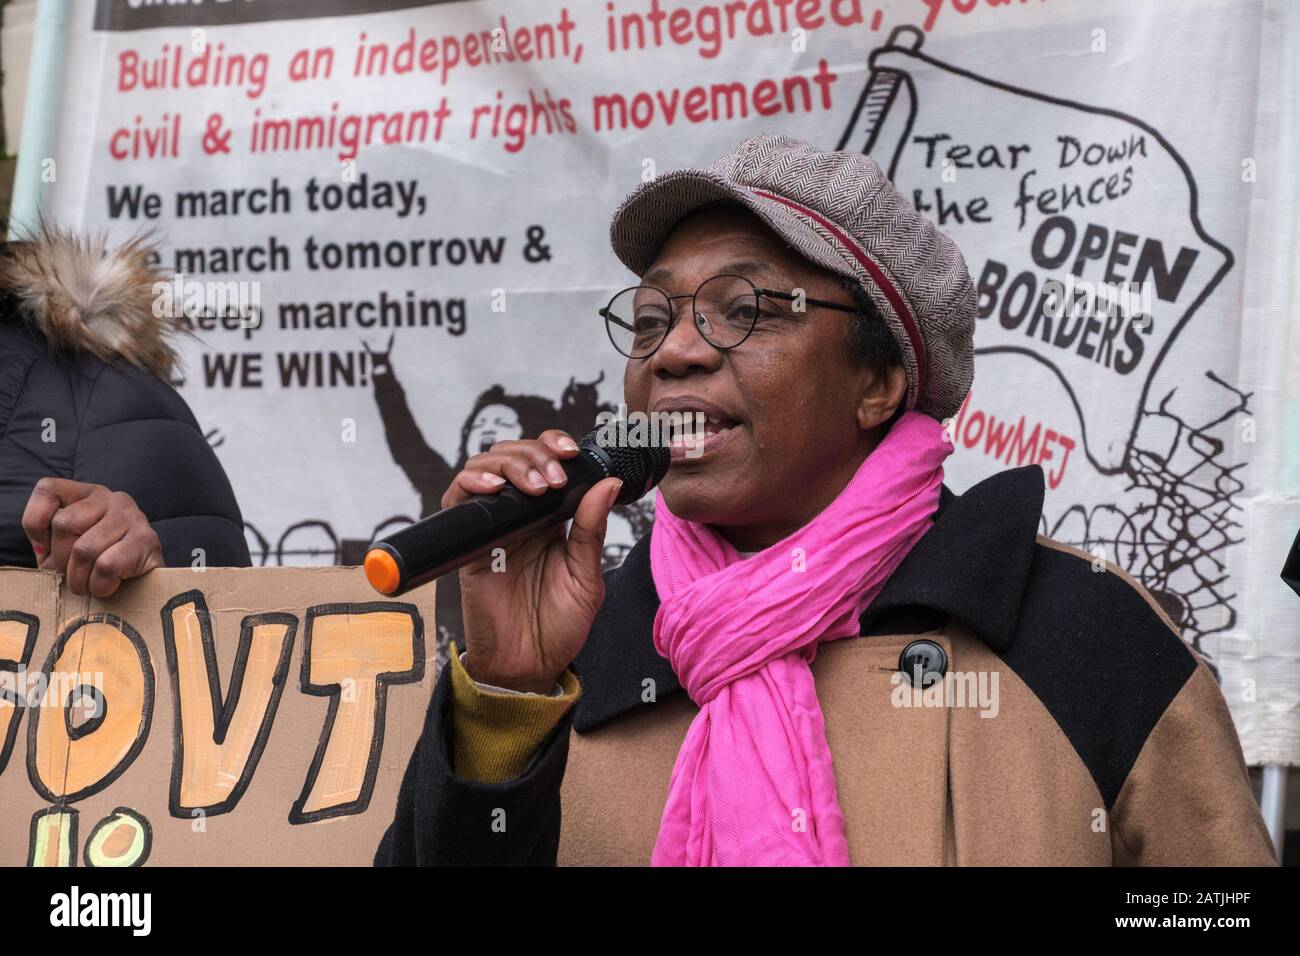 London, UK. 3rd February 2020. A black woman speaks at the Movement for Justice protest outside the Jamaican High Commission demanding Jamaica end accepting Britain's racist deportation flights. They say these are a modern equivalent of slave ships, with deportees manacled between guards for the flight. Those seized include many from Windrush families who have lived here most of their lives but are unable to produce the exhaustive paperwork demanded and seldom have the chance to properly contest their case. Peter Marshall/Alamy Live News Stock Photo